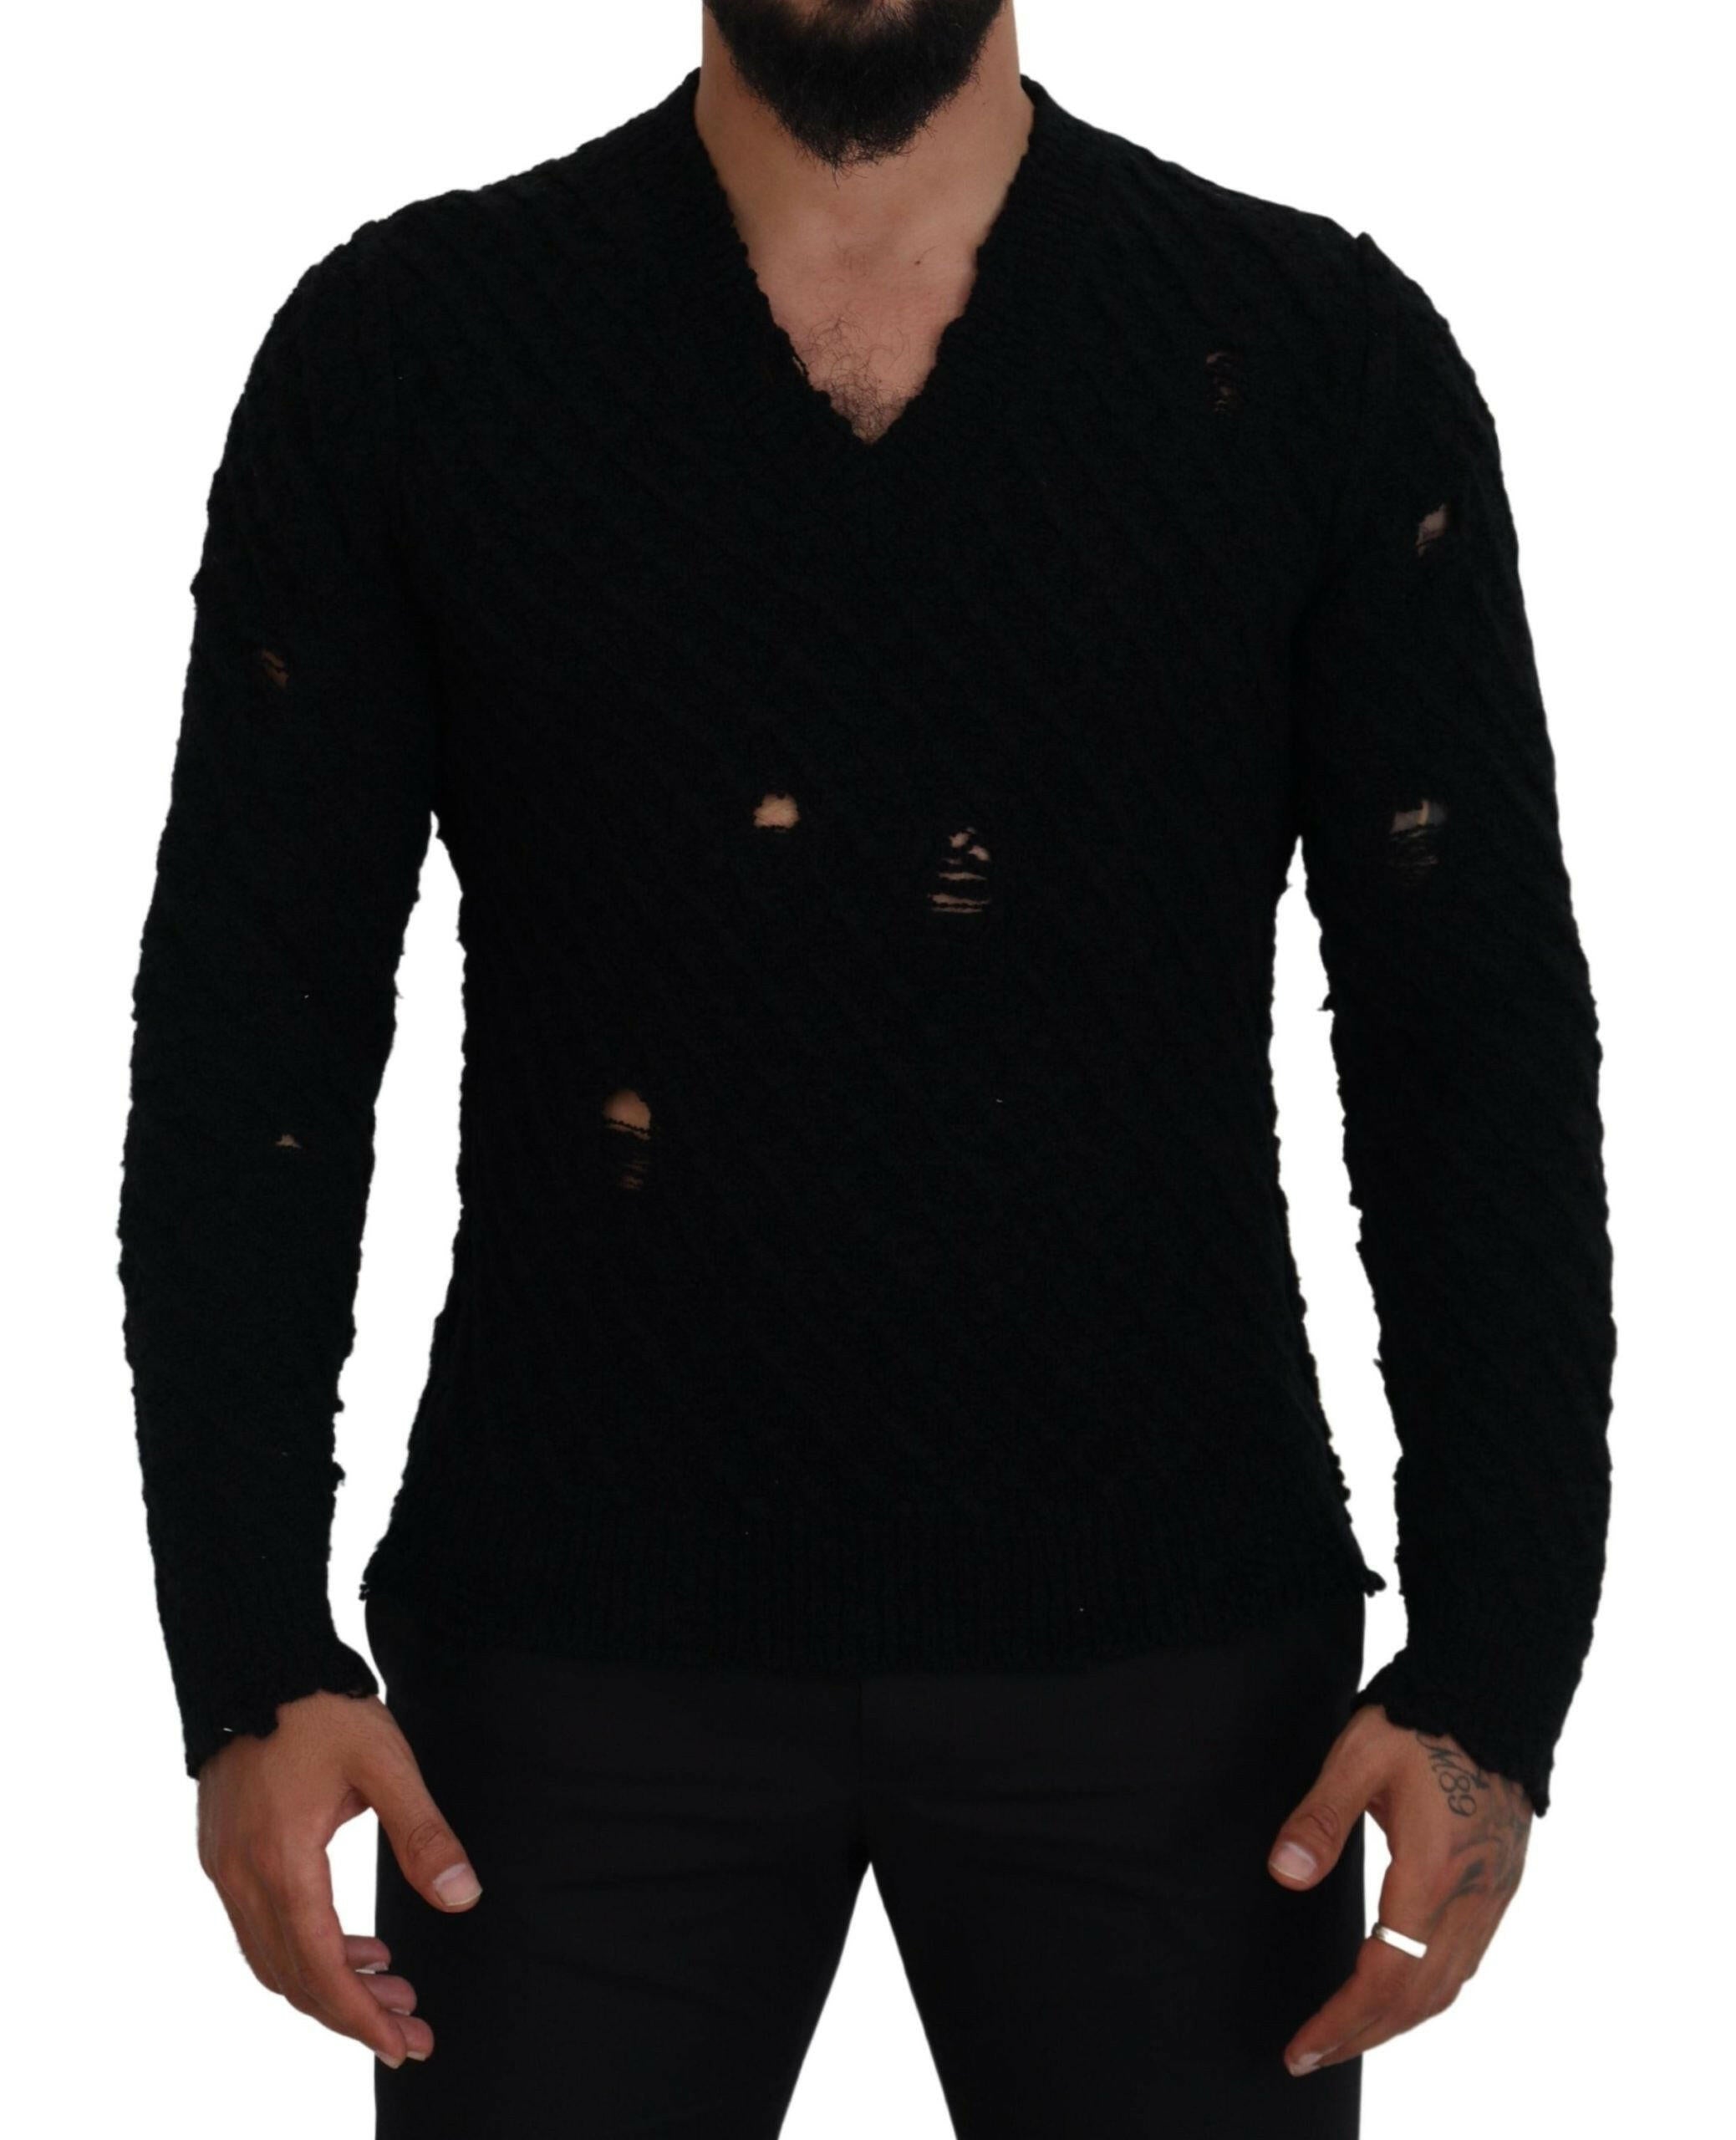 Dolce & Gabbana Black Wool V-neck Knitted Pullover Sweater - GENUINE AUTHENTIC BRAND LLC  